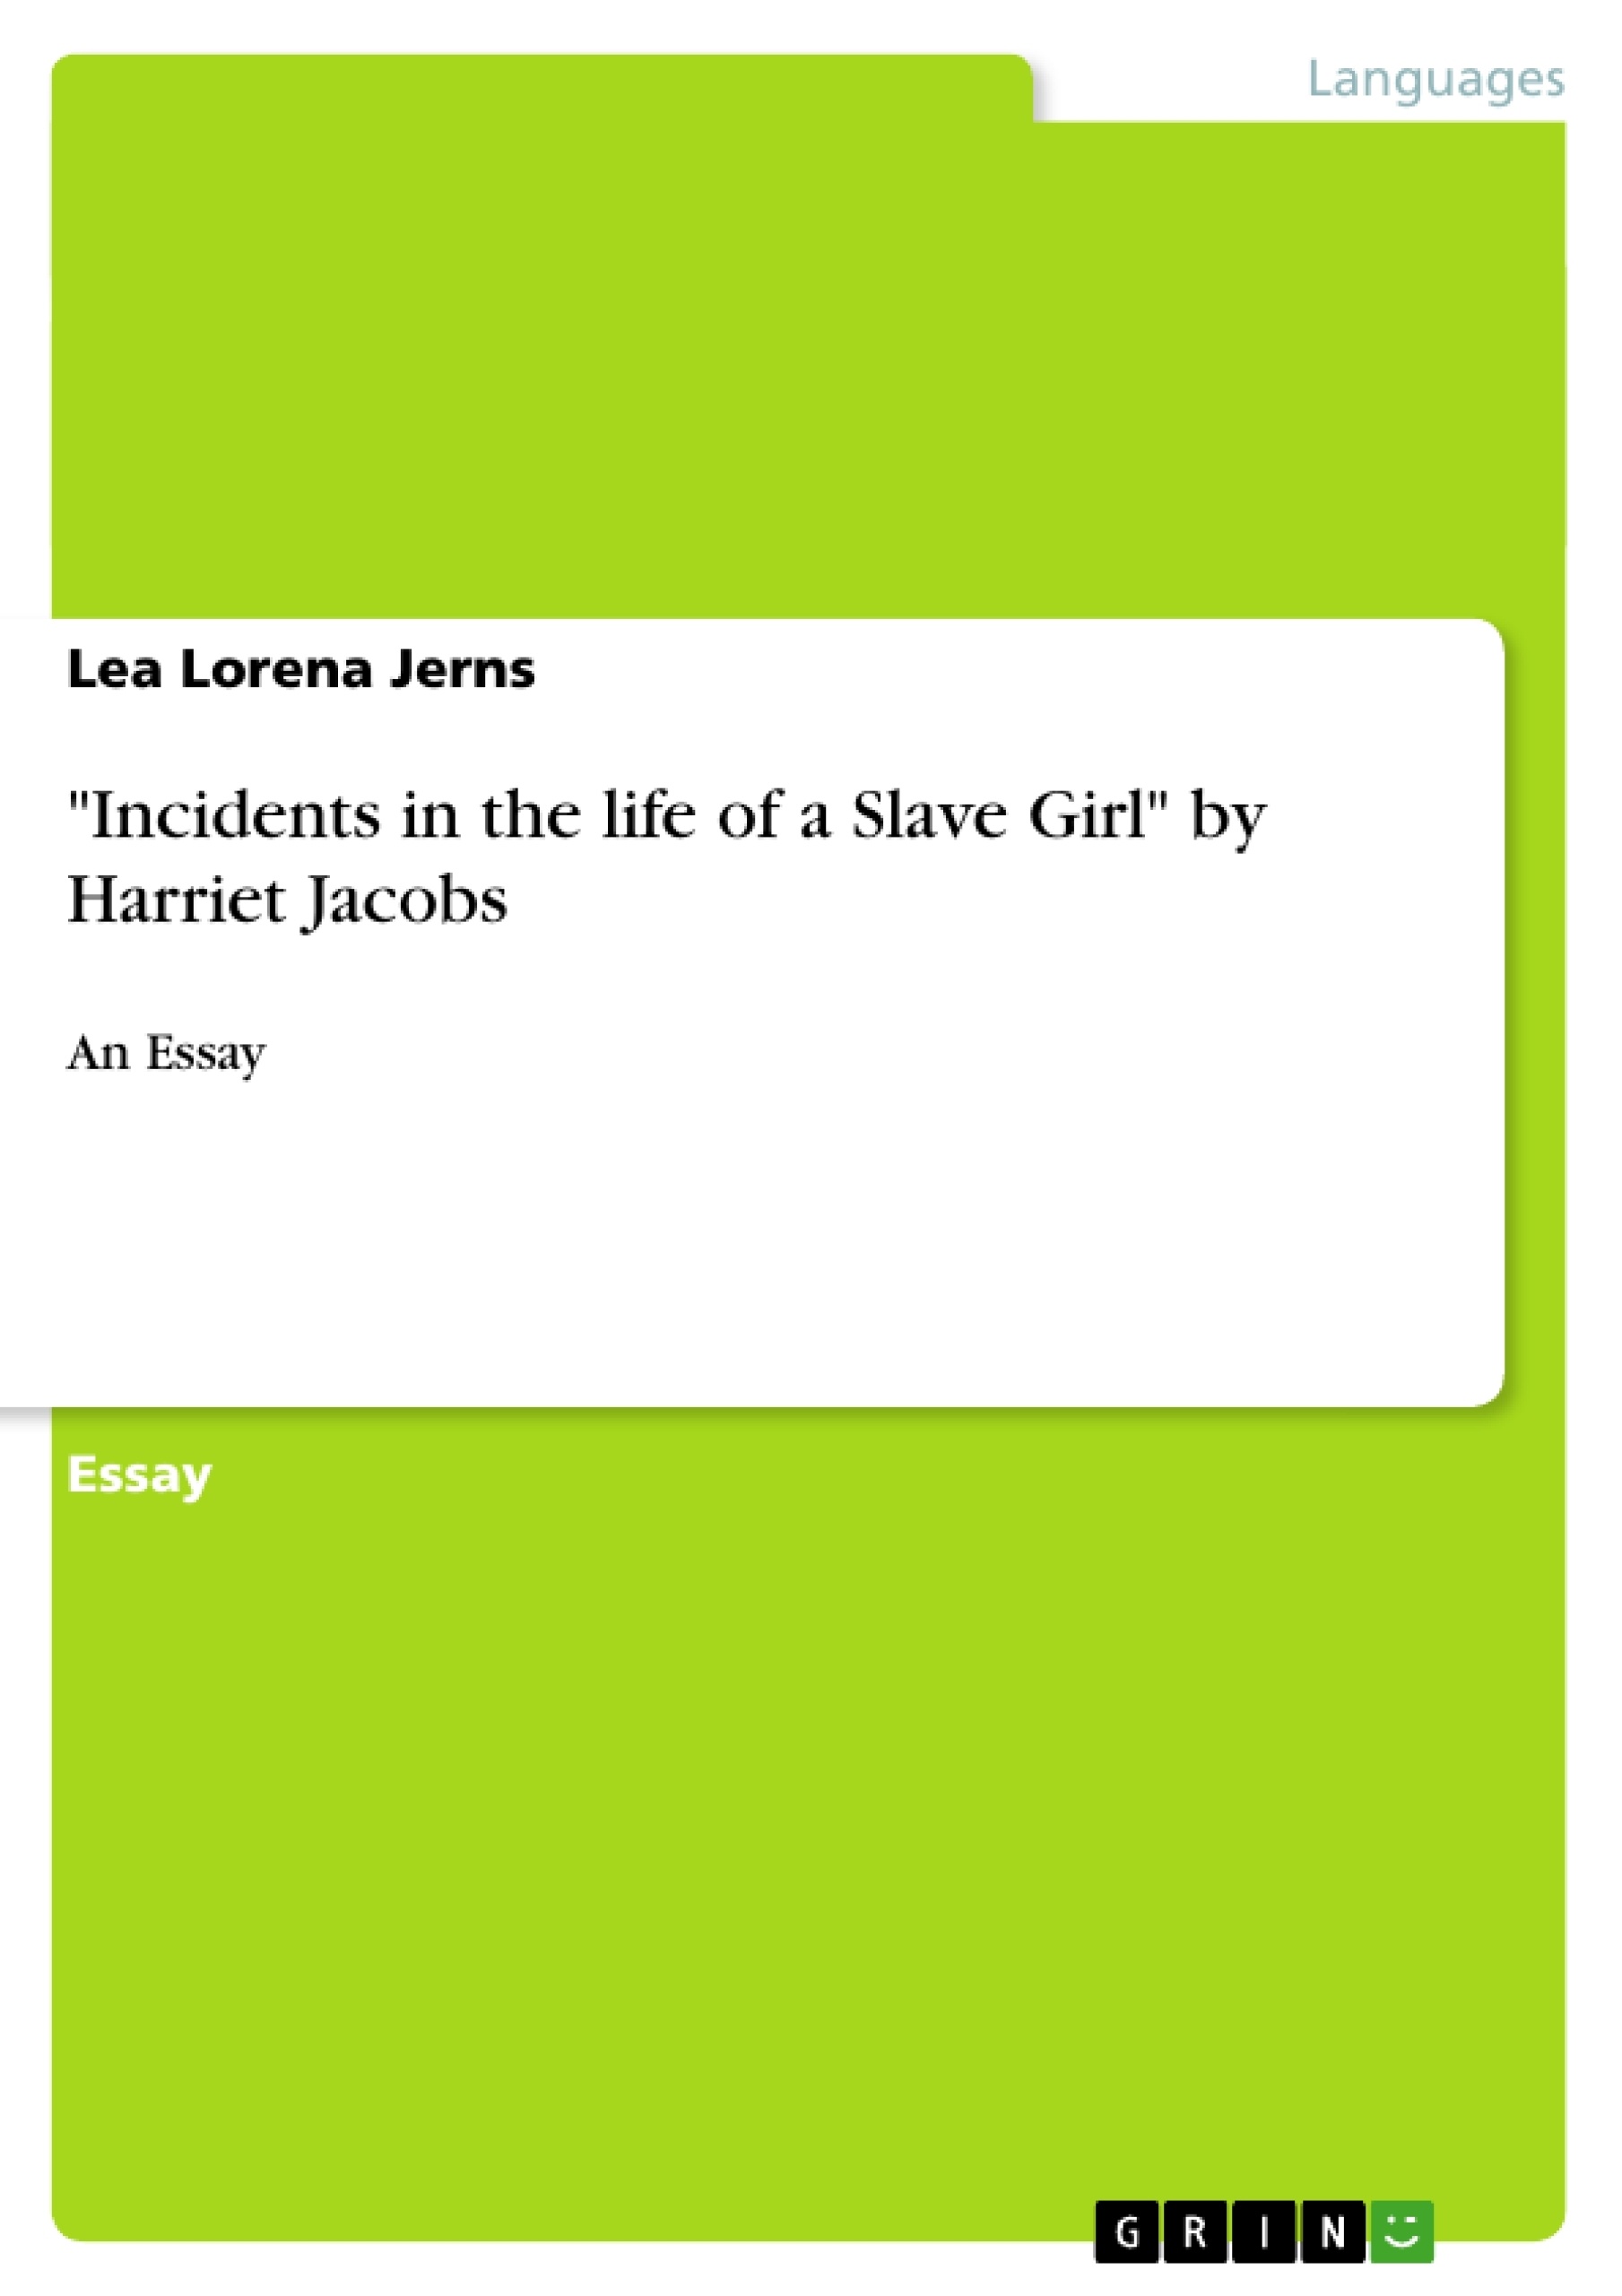 Title: "Incidents in the life of a Slave Girl" by Harriet Jacobs